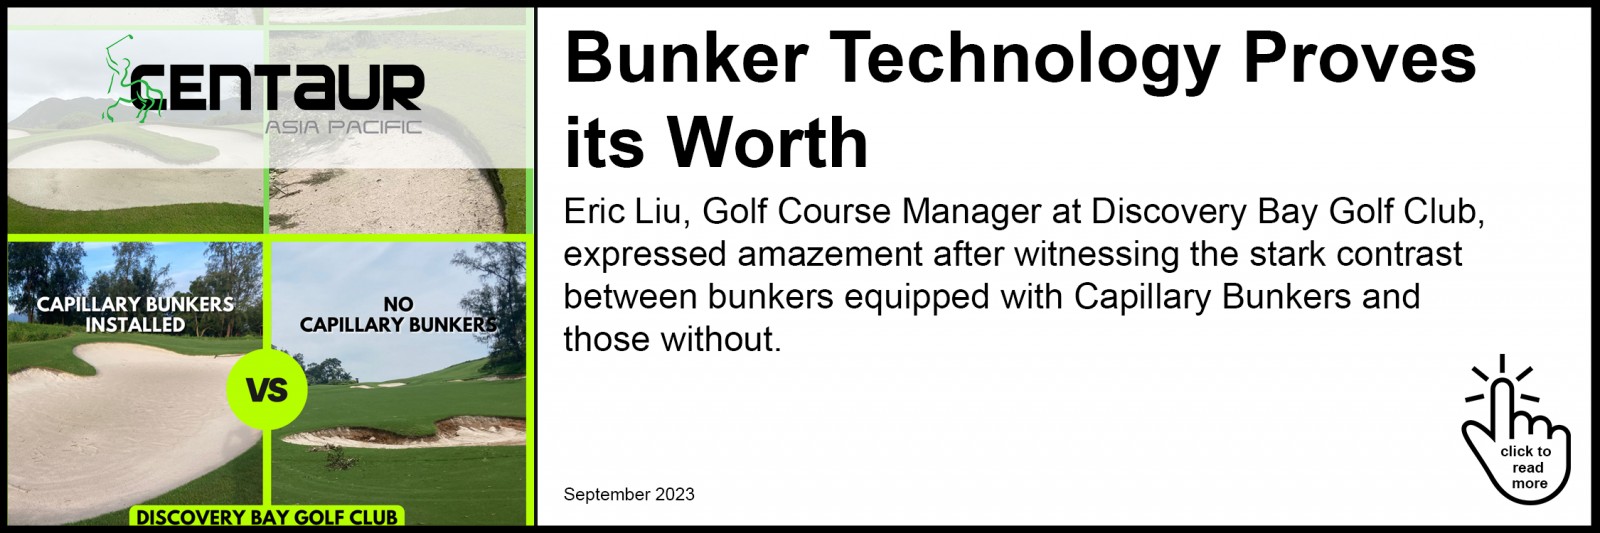 Bunker Technology Proves its Worth